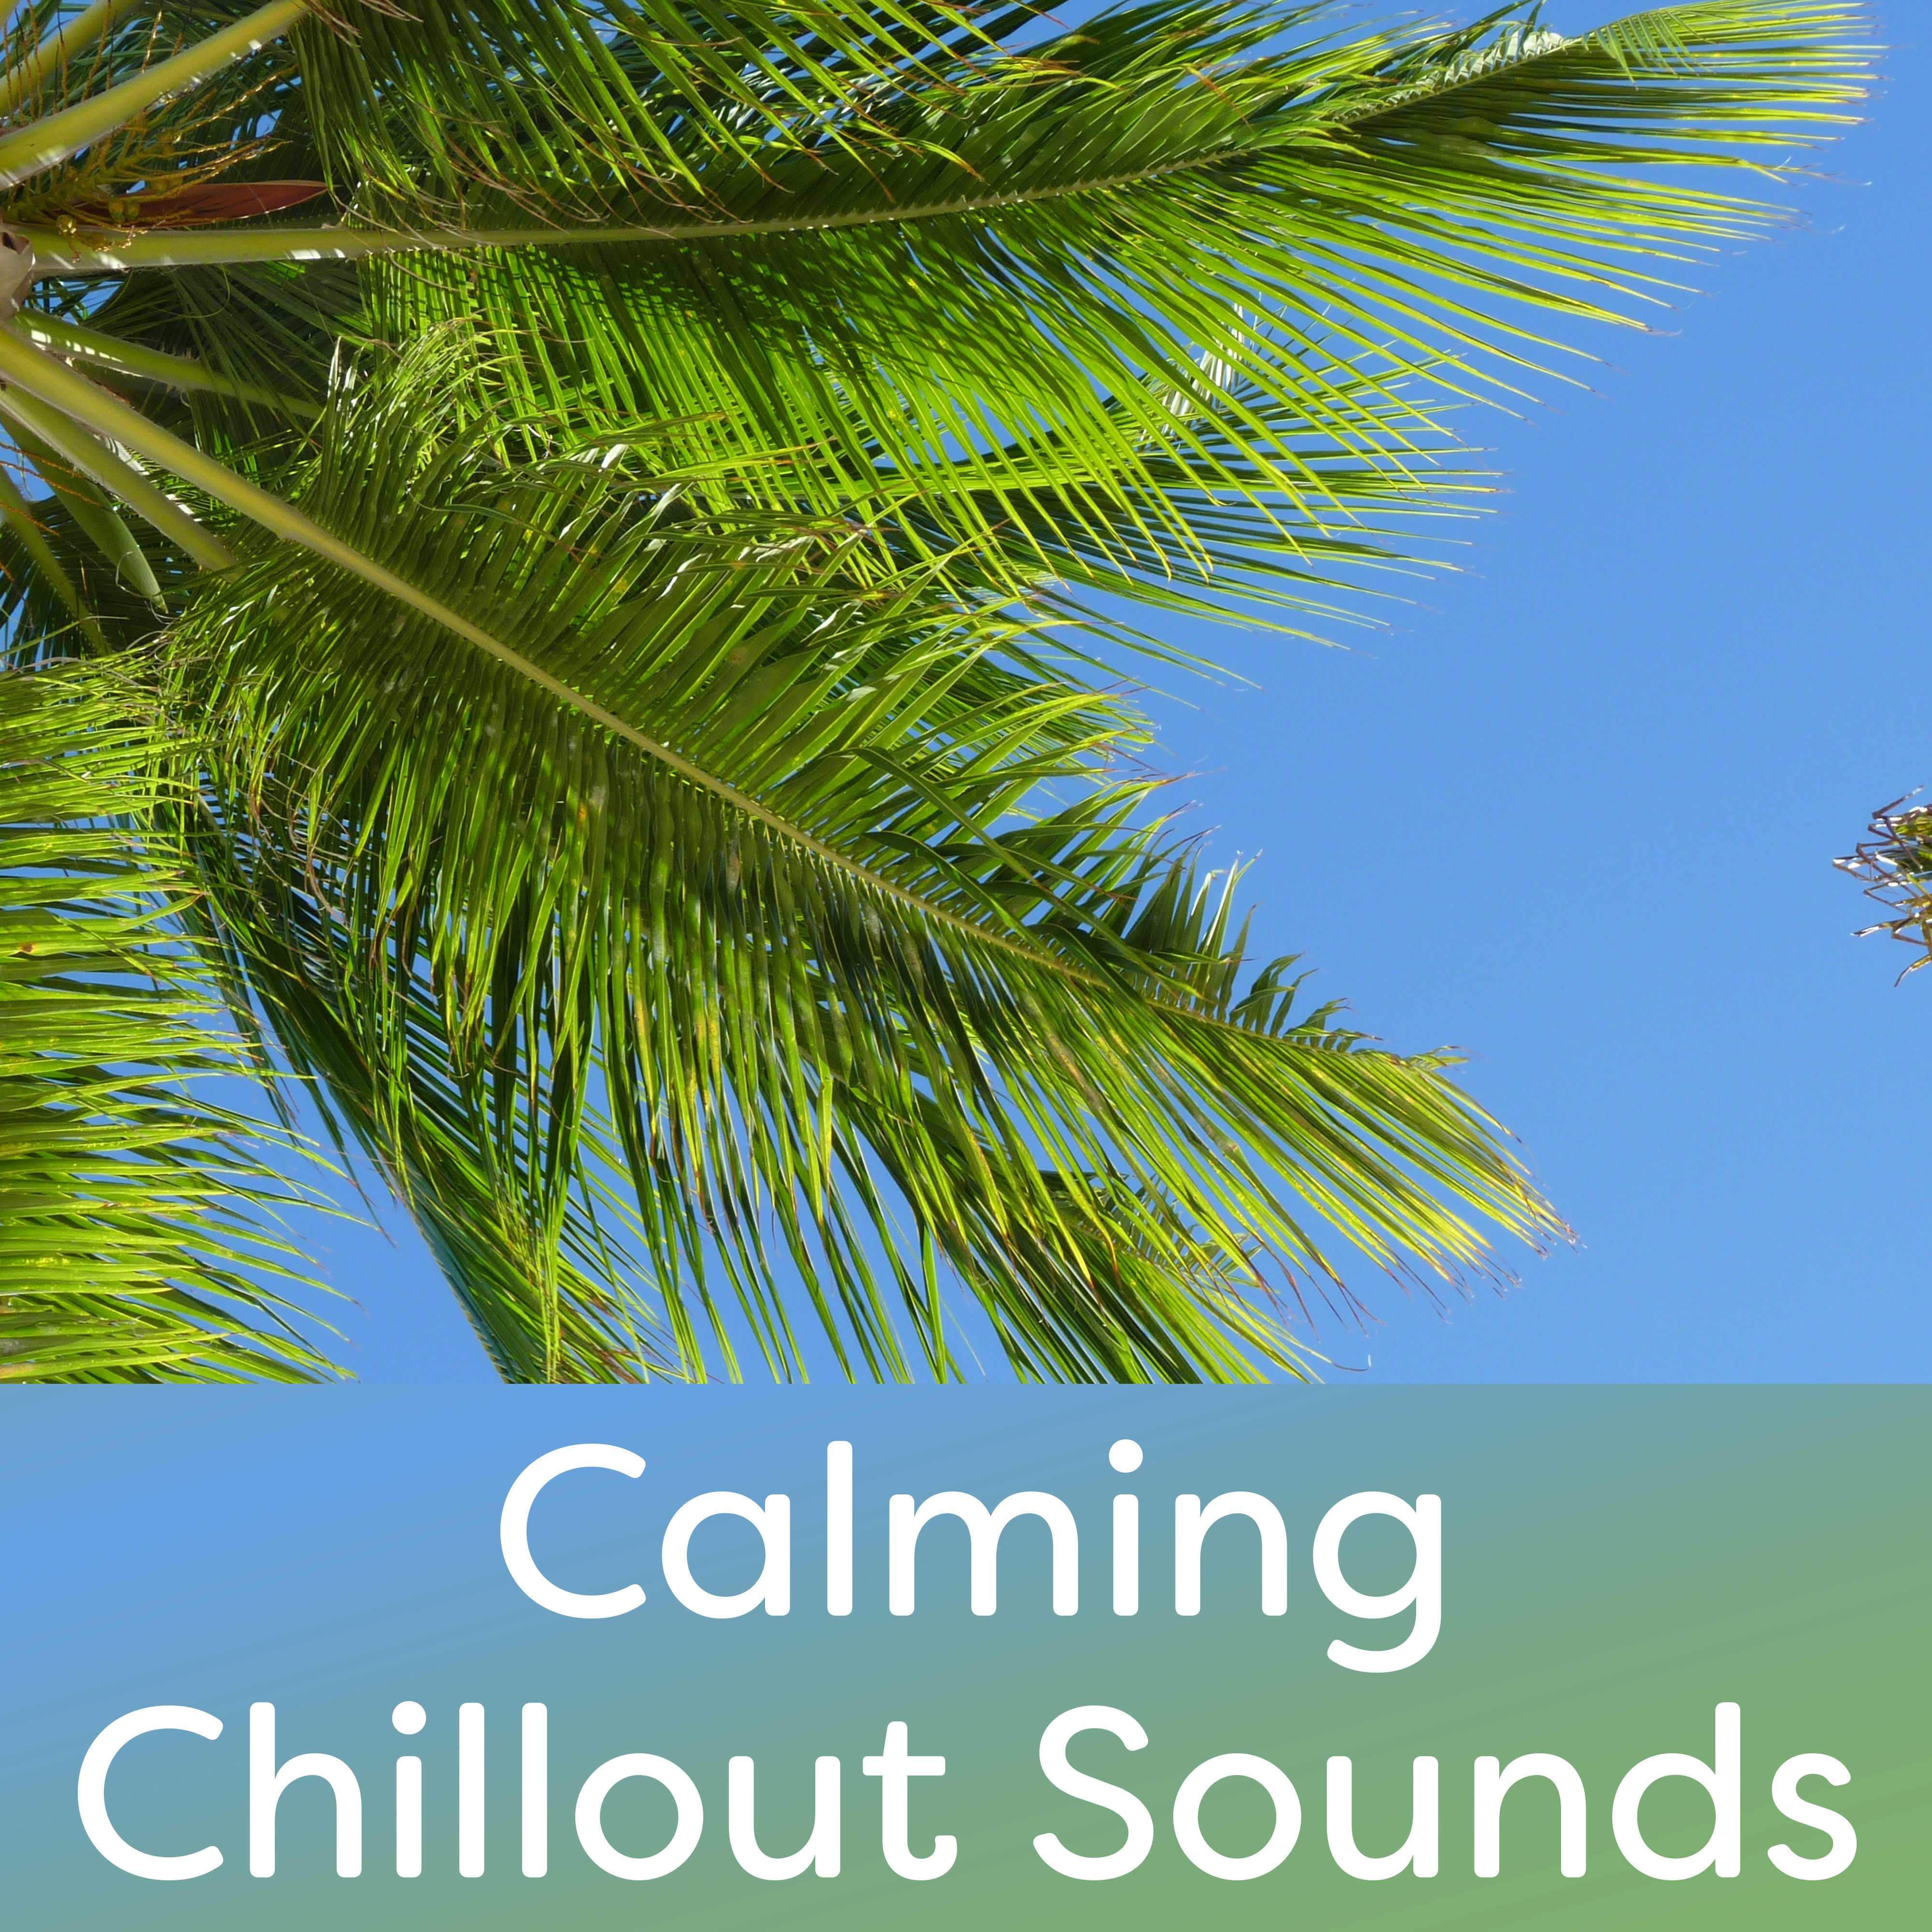 Calming Chillout Sounds – Stress Relief, Chill Out Music, Easy Listening, Calm Music to Rest